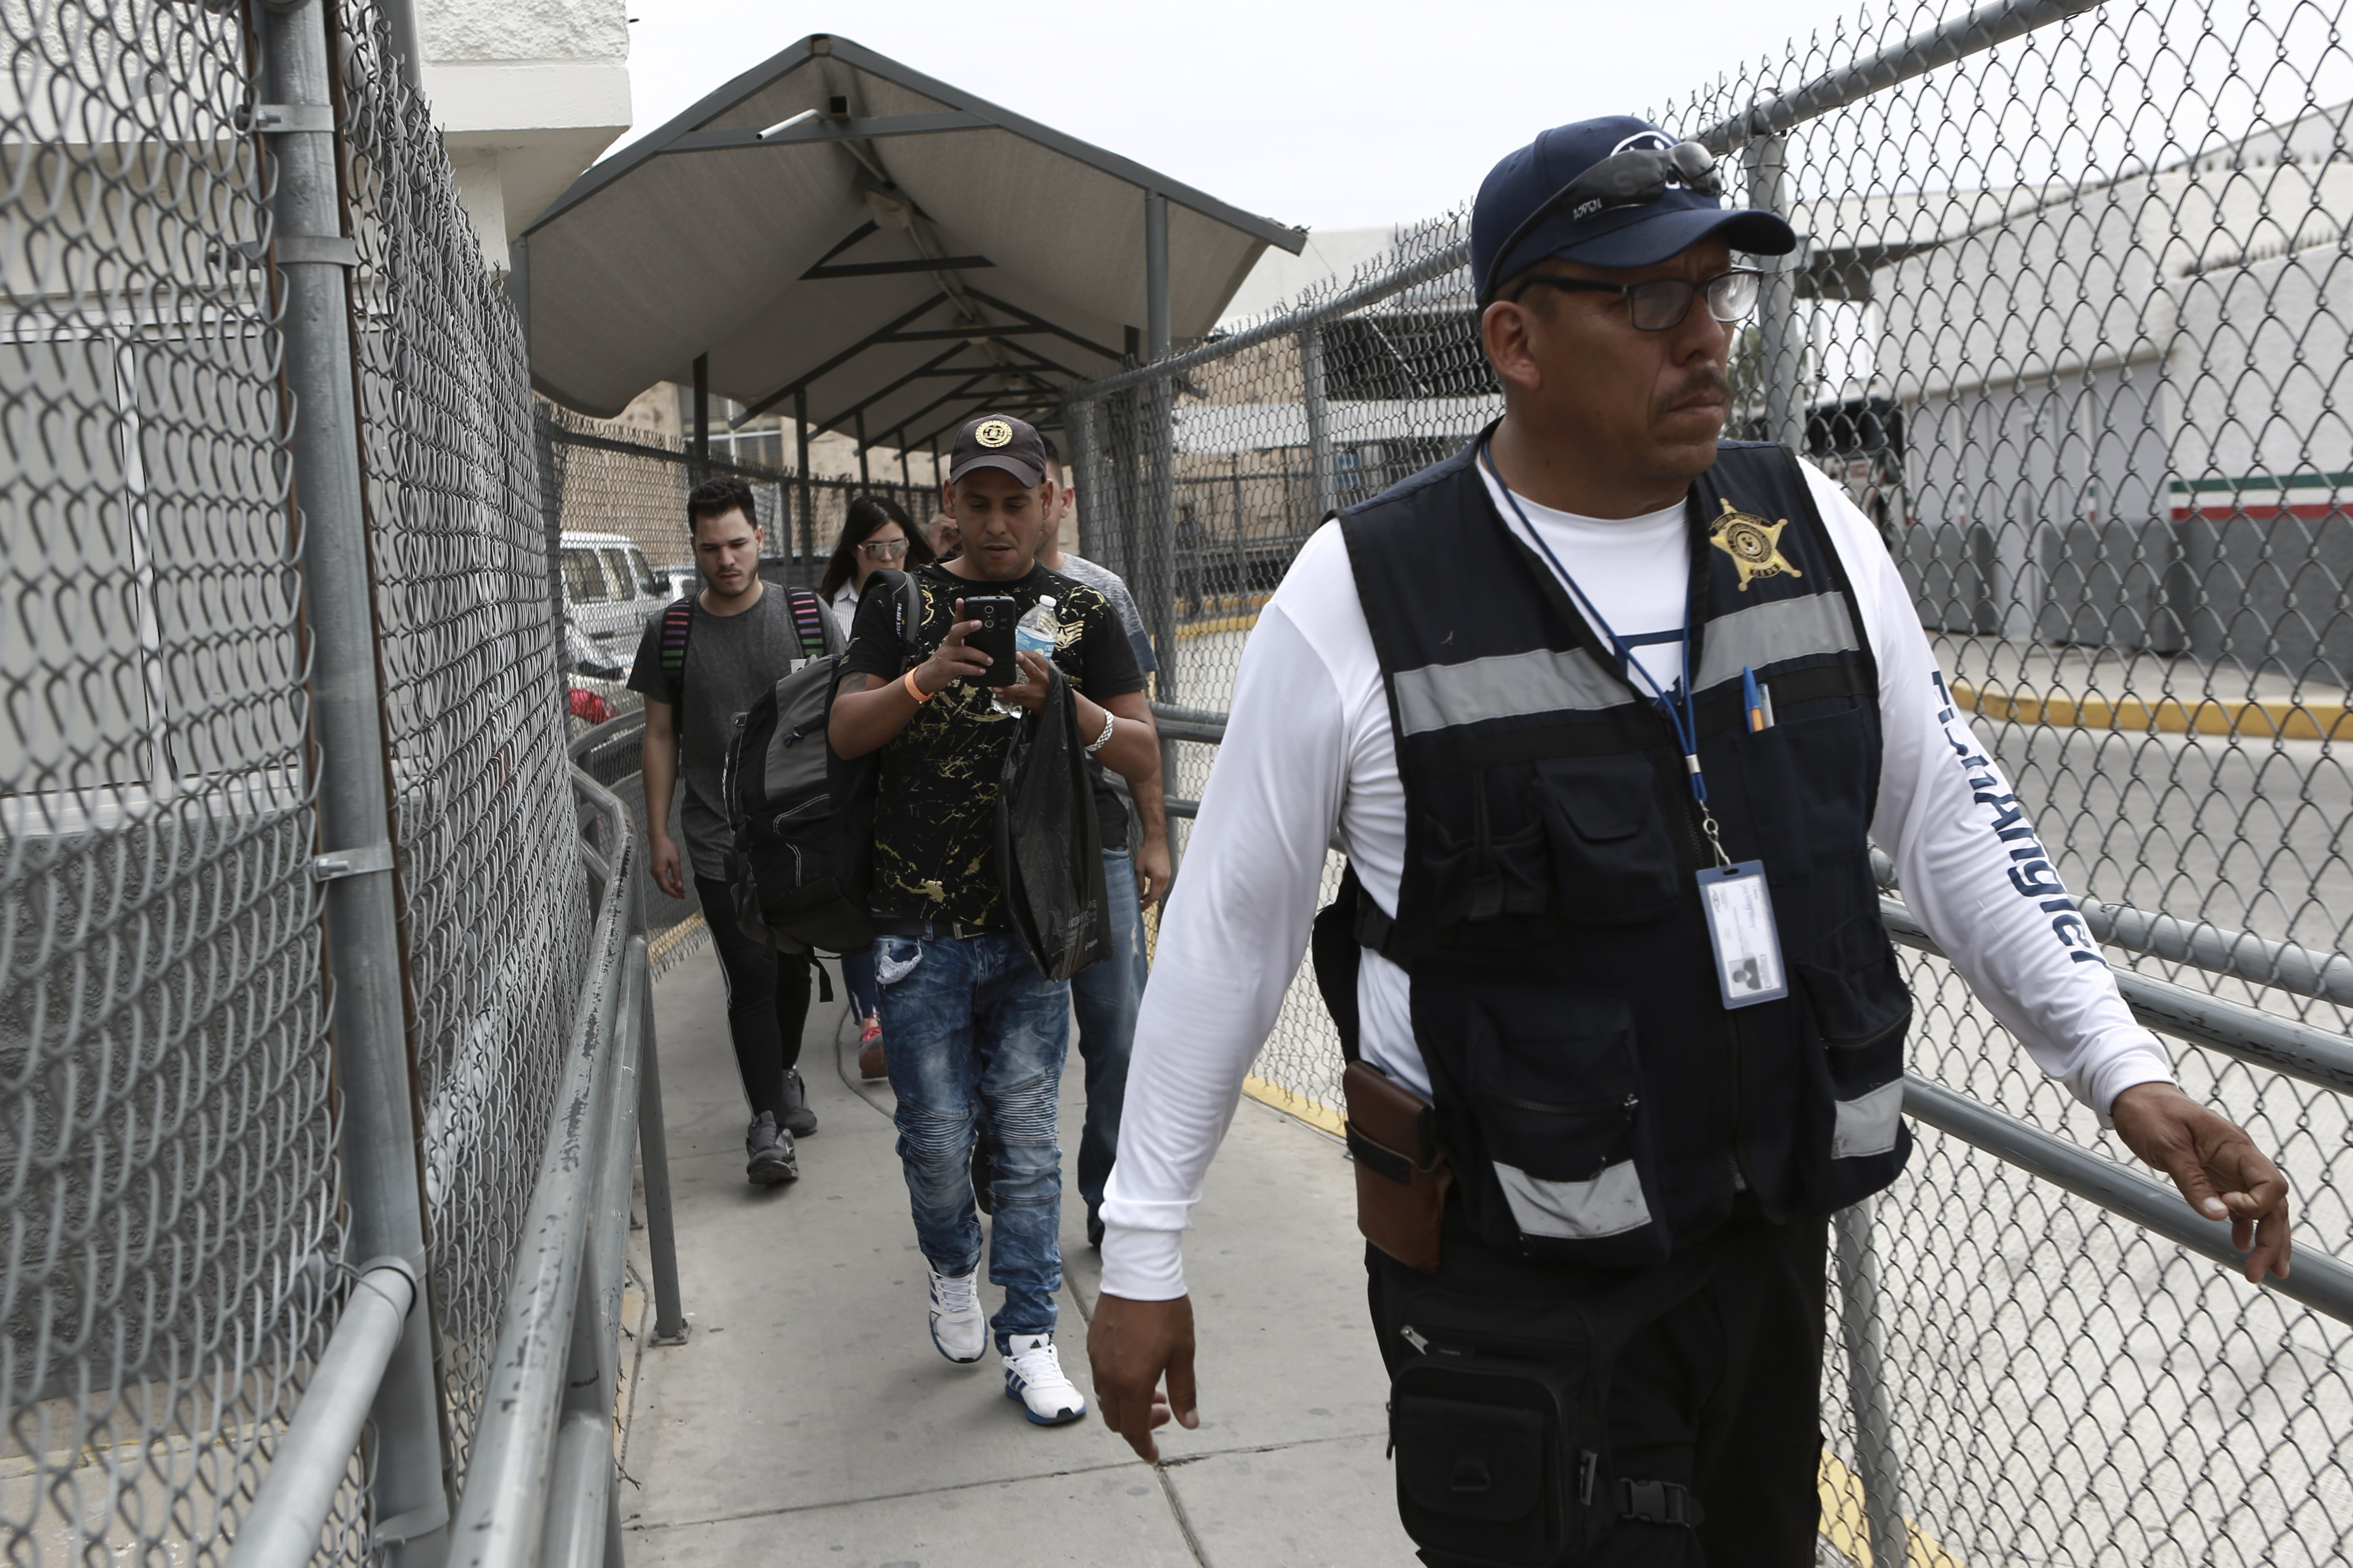 A security guard leads a group of U.S. asylum-seekers out of Mexican immigration offices after they were returned by U.S. authorities to wait in Mexico under the so-called Remain in Mexico program, in Ciudad Juarez, Mexico, Wednesday, July 17, 2019. Asylum-seekers still waiting to begin the process grappled to understand what a new U.S. policy that all but eliminates refugee claims by Central Americans and many others meant for their bids to find a better life in America. (AP Photo/Christian Chavez)